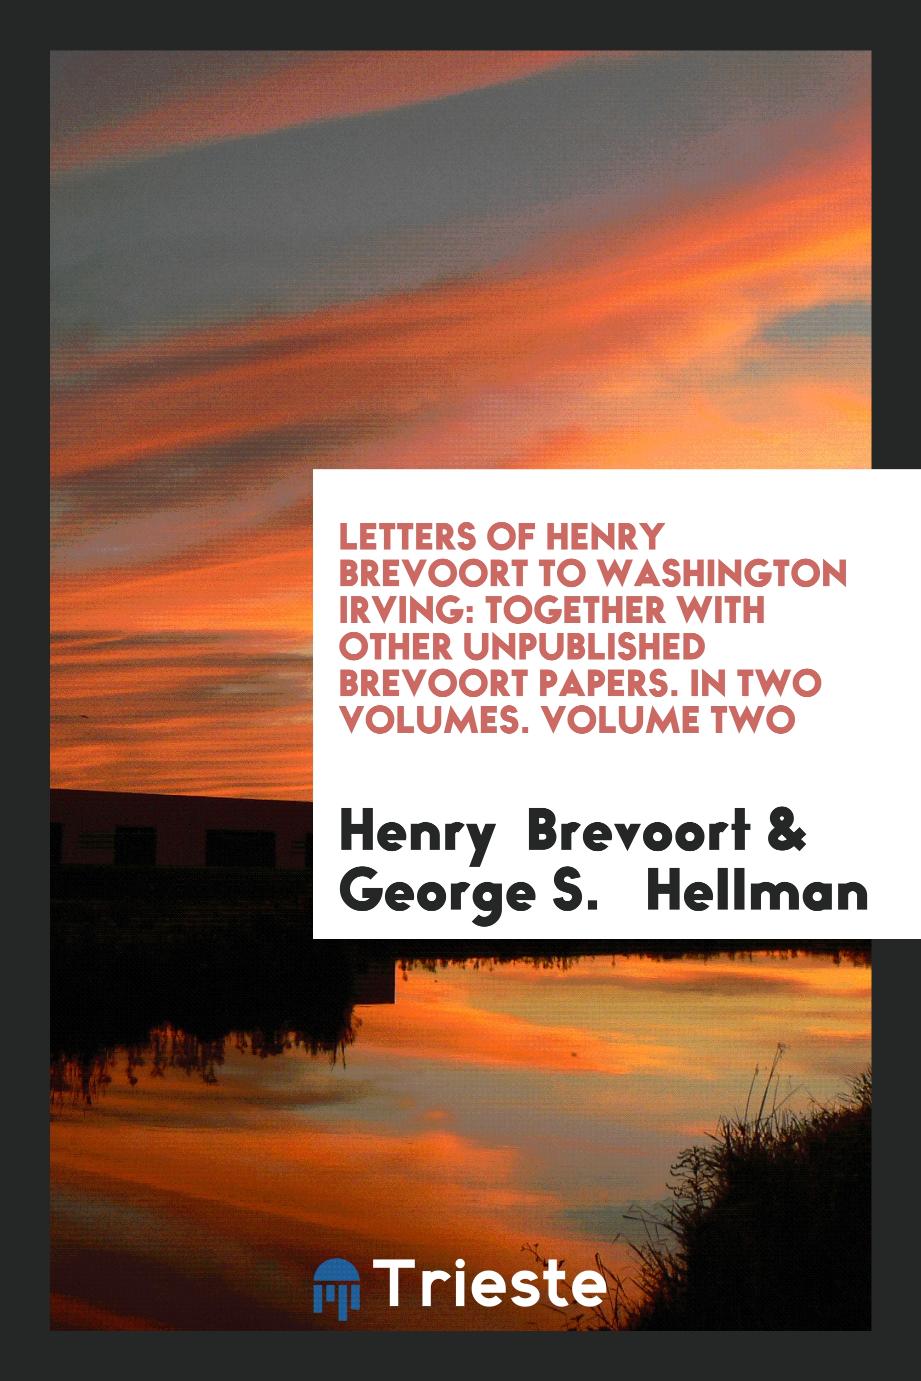 Letters of Henry Brevoort to Washington Irving: Together with Other Unpublished Brevoort Papers. In Two Volumes. Volume Two